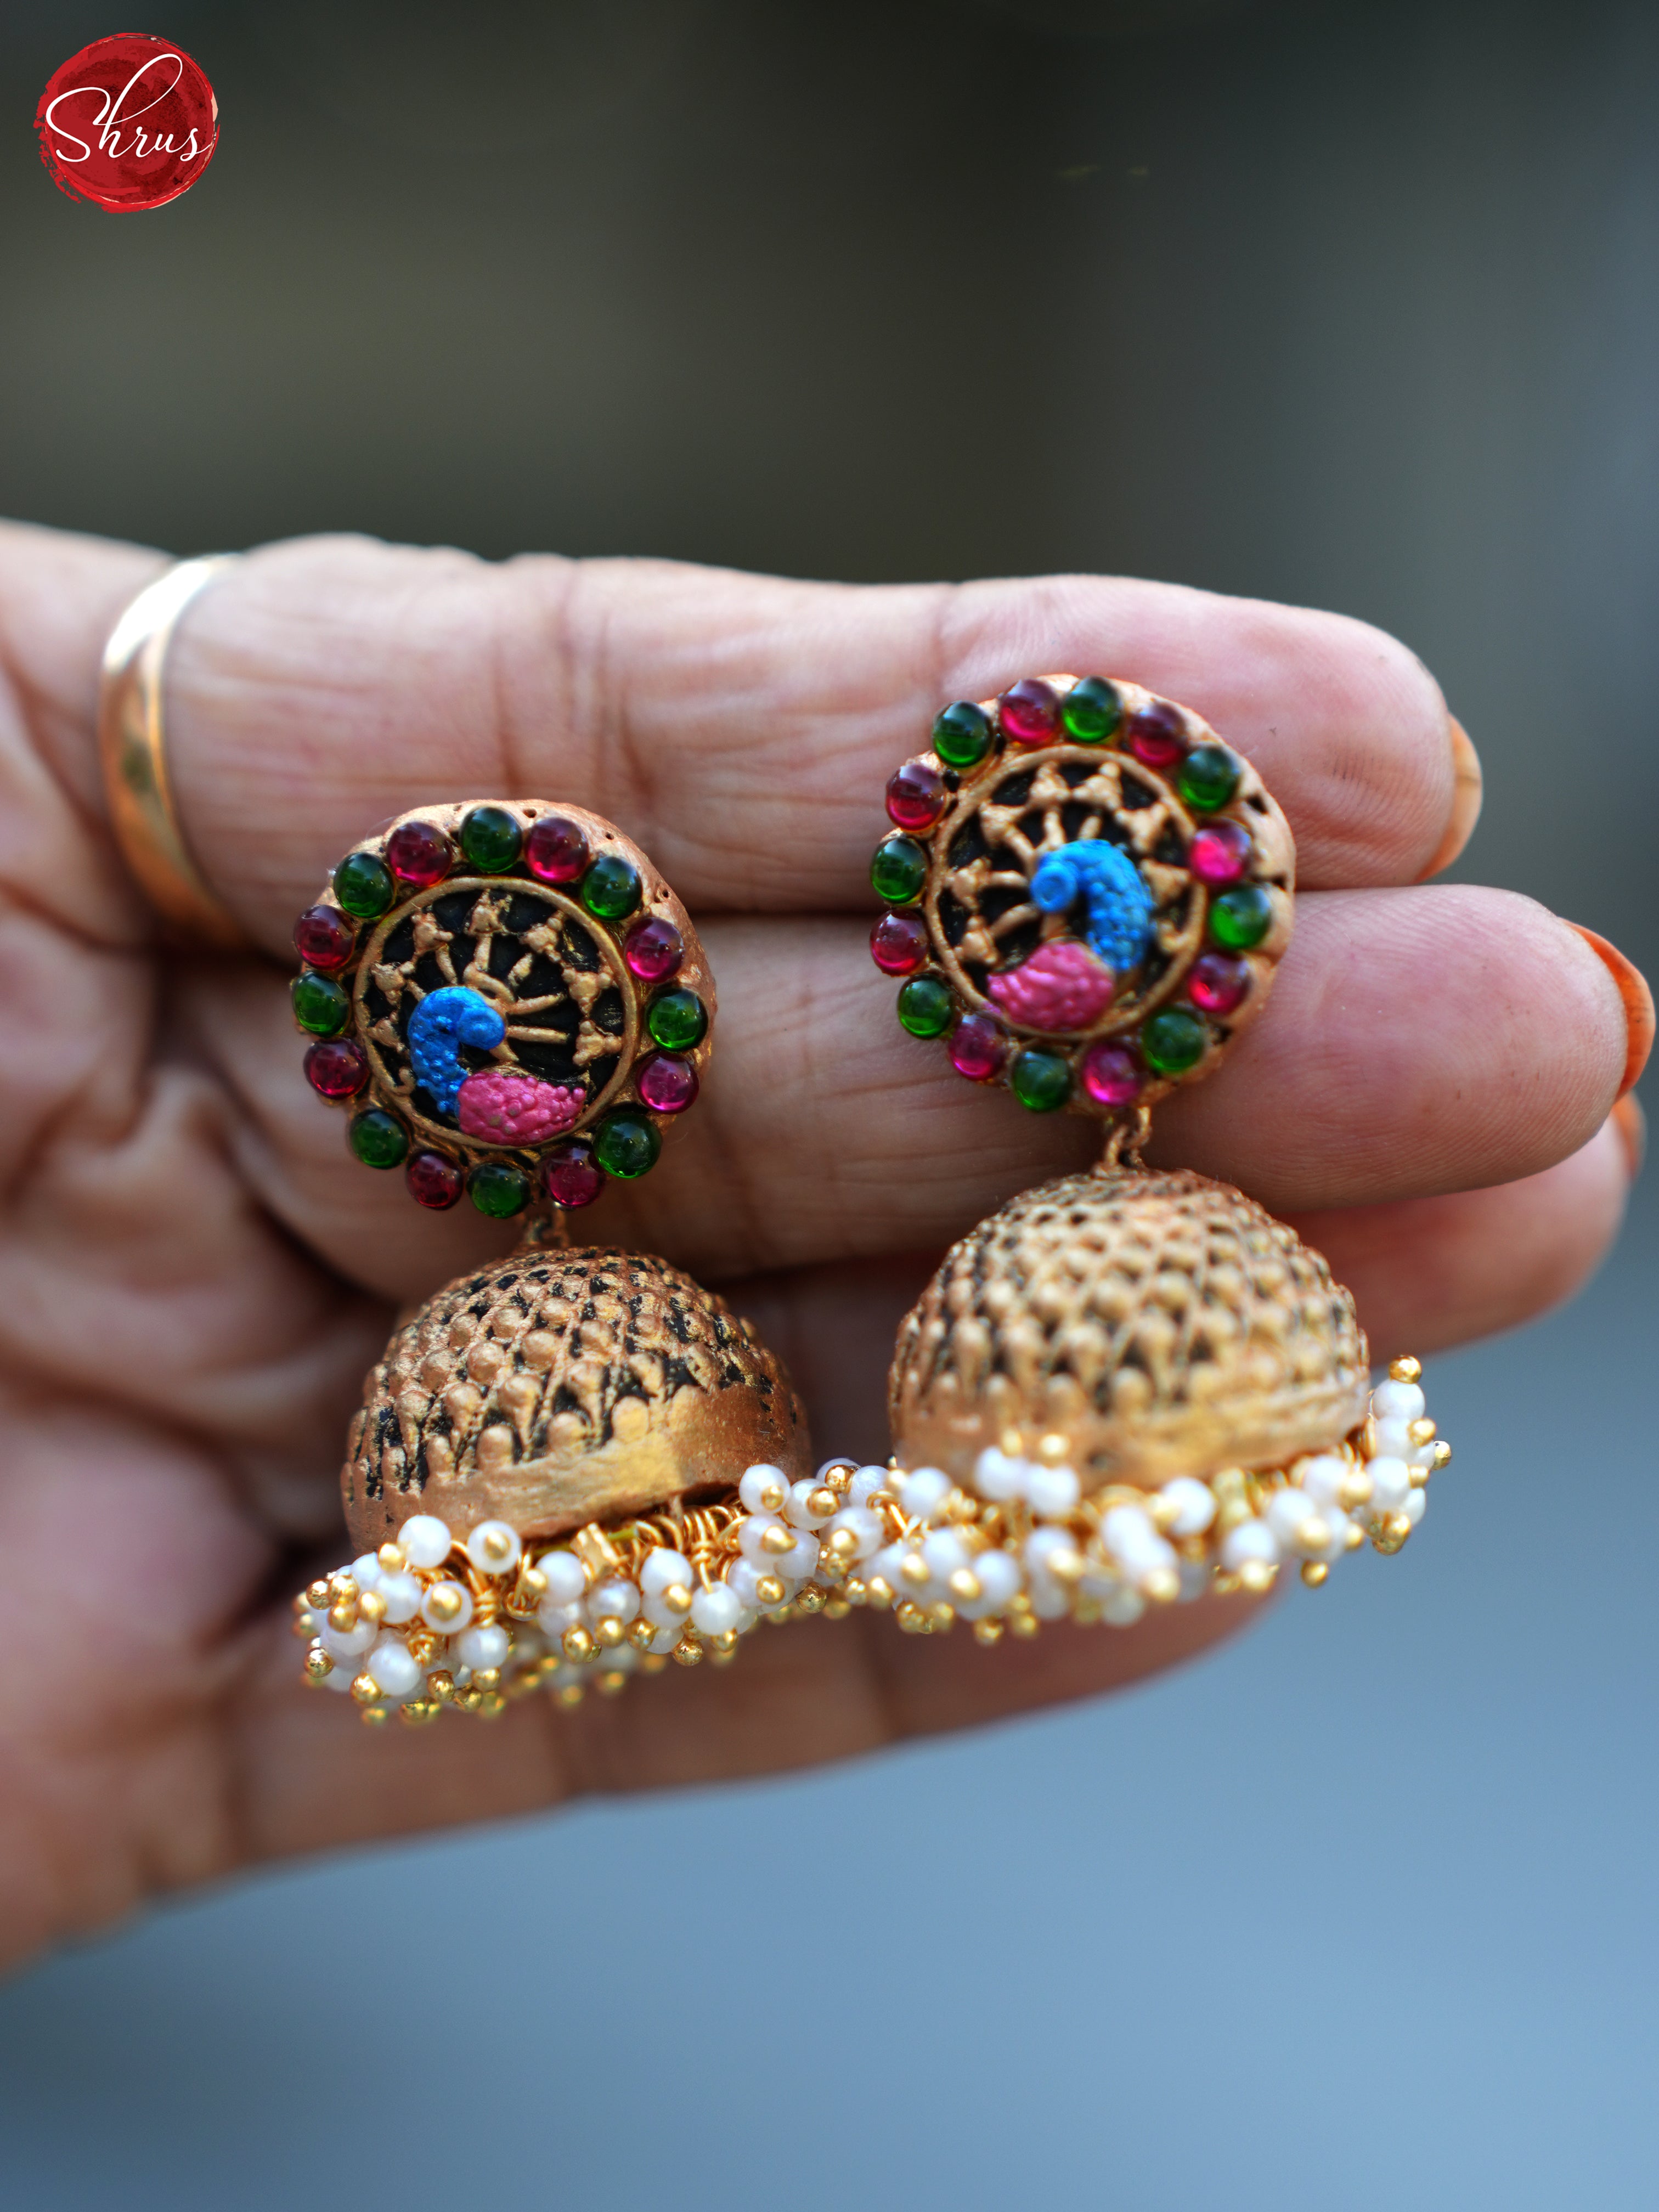 Handcrafted Peacock Terracota necklace with Jhumkas - Accessories - Shop on ShrusEternity.com